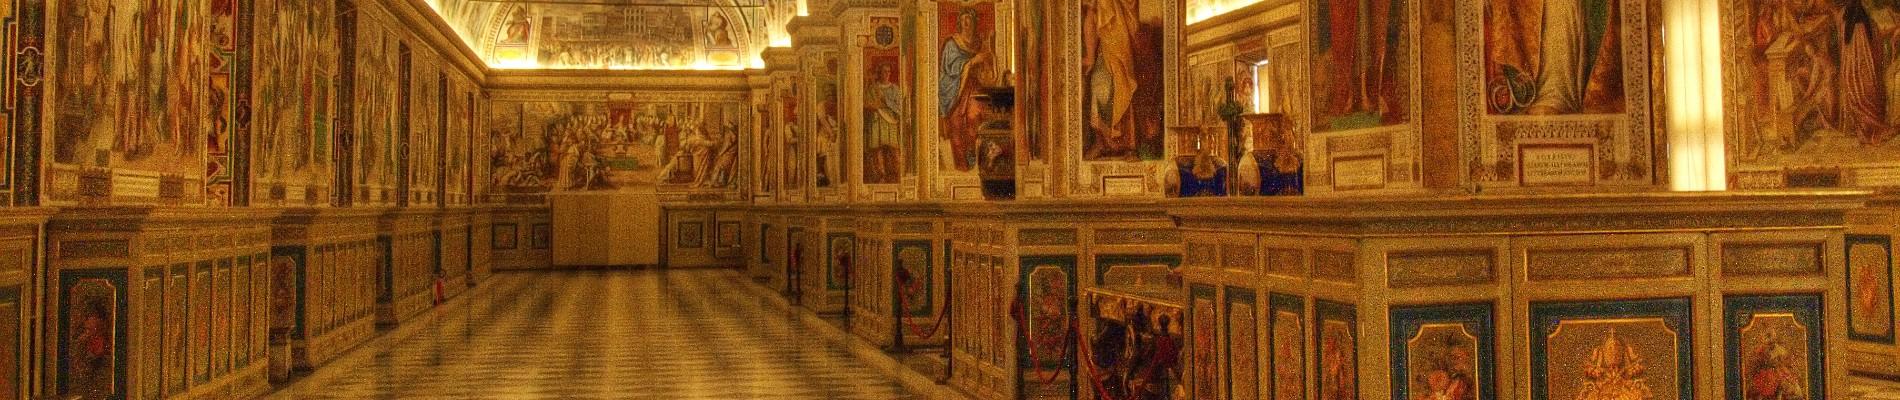 The Vatican Museums!